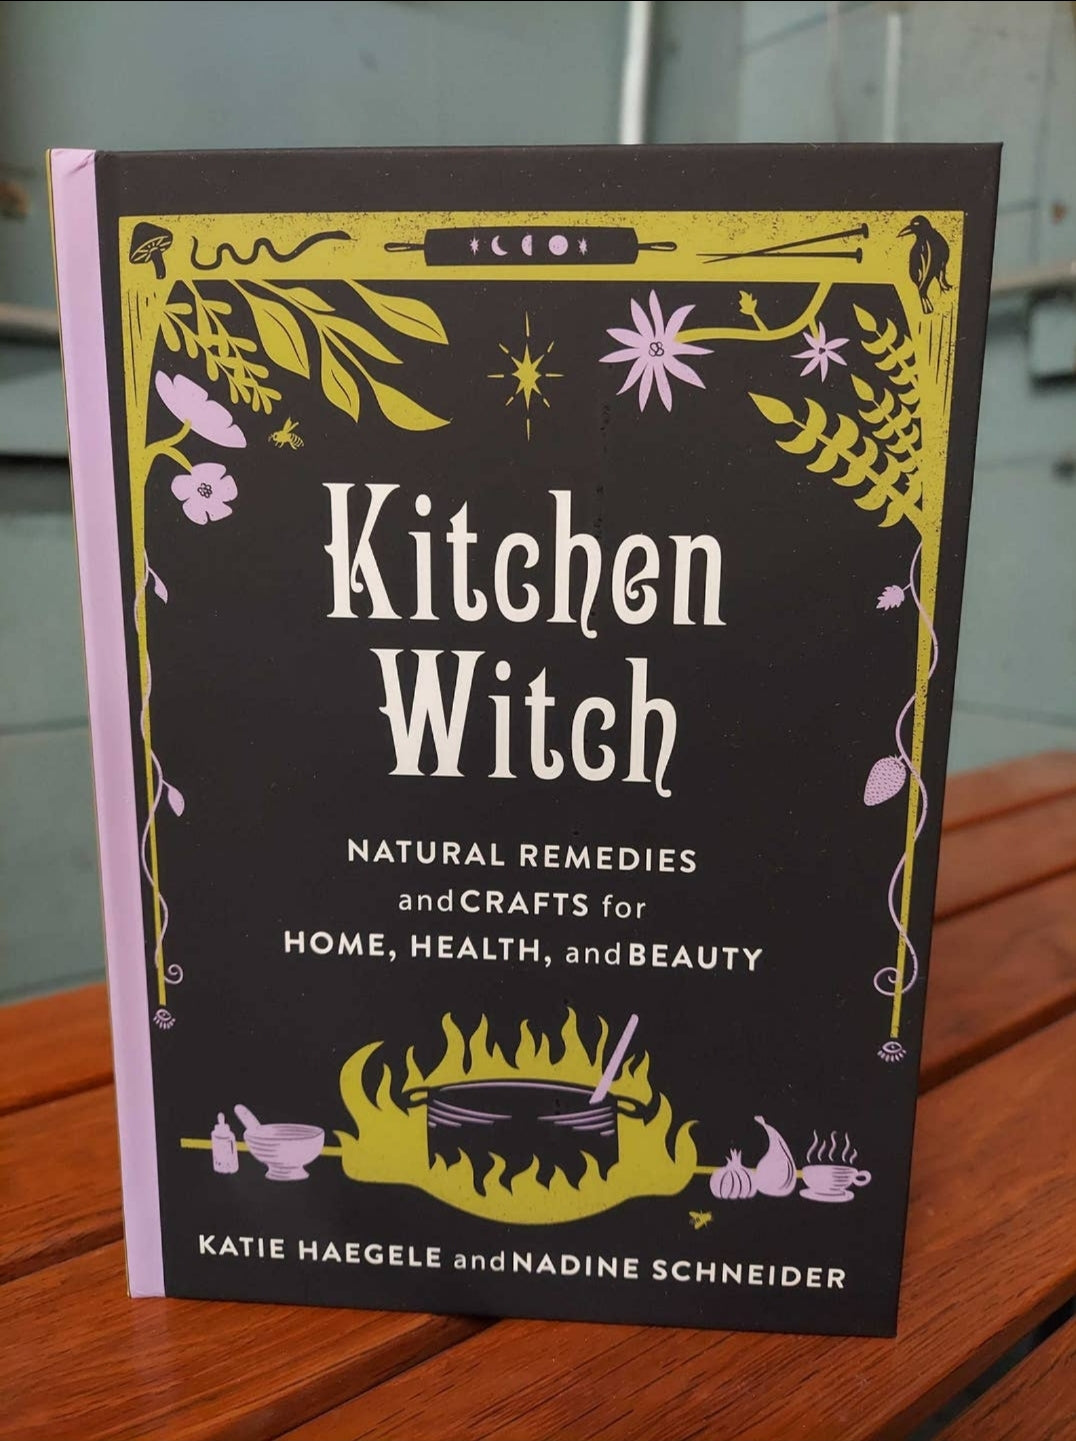 Kitchen Witch: Natural Remedies and Crafts for Home, Health, and Beauty
by Katie Haegele AUTHOR and Nadine Schneider AUTHOR